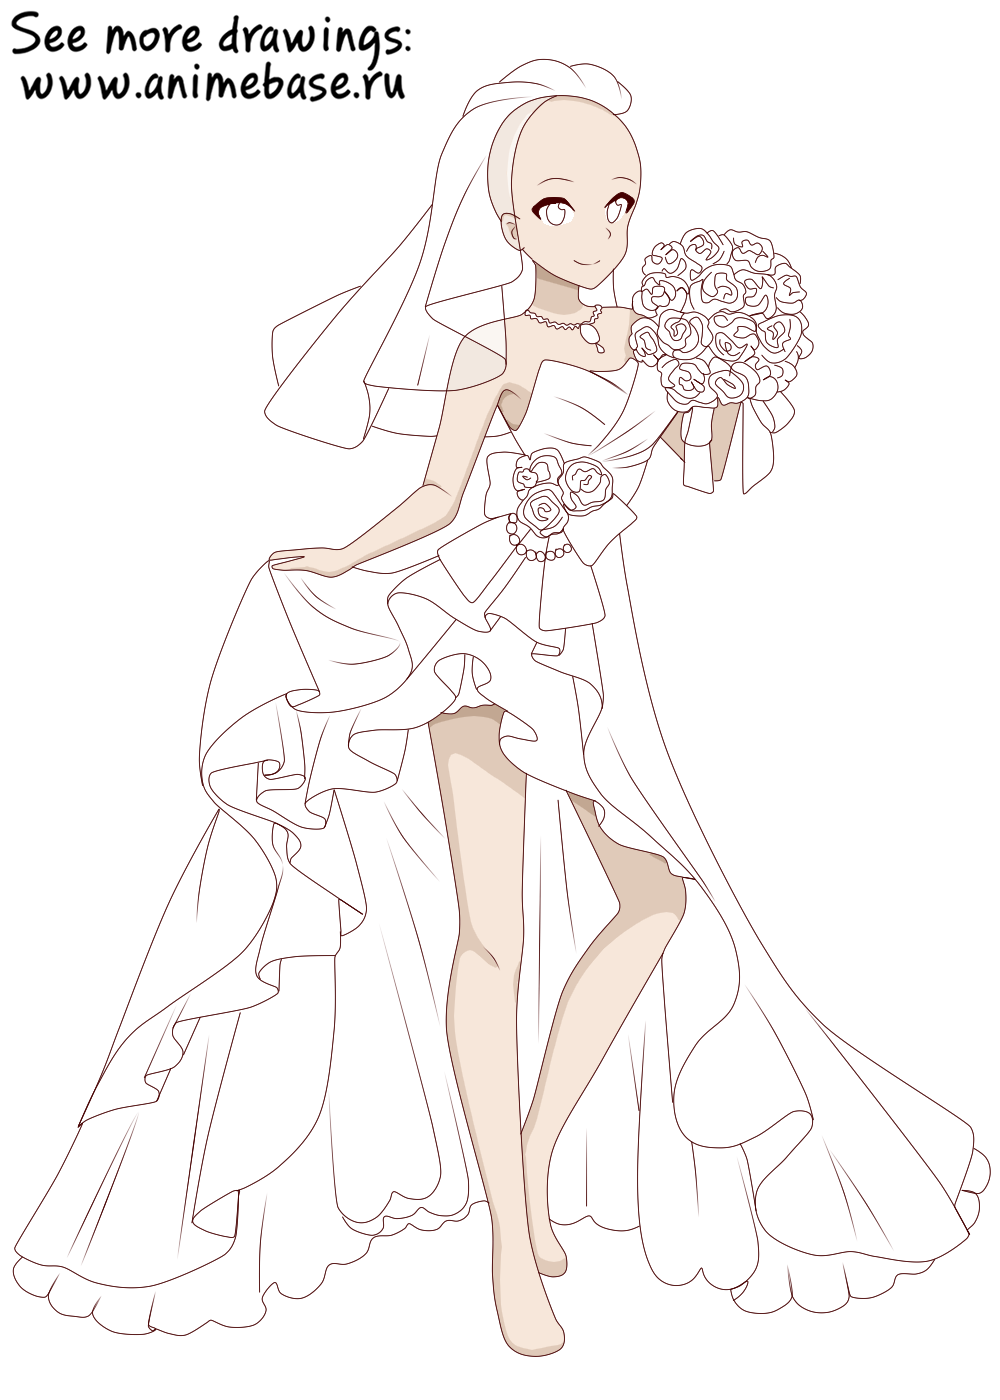 Wedding dress and bouquet of flowers - Anime Bases .INFO